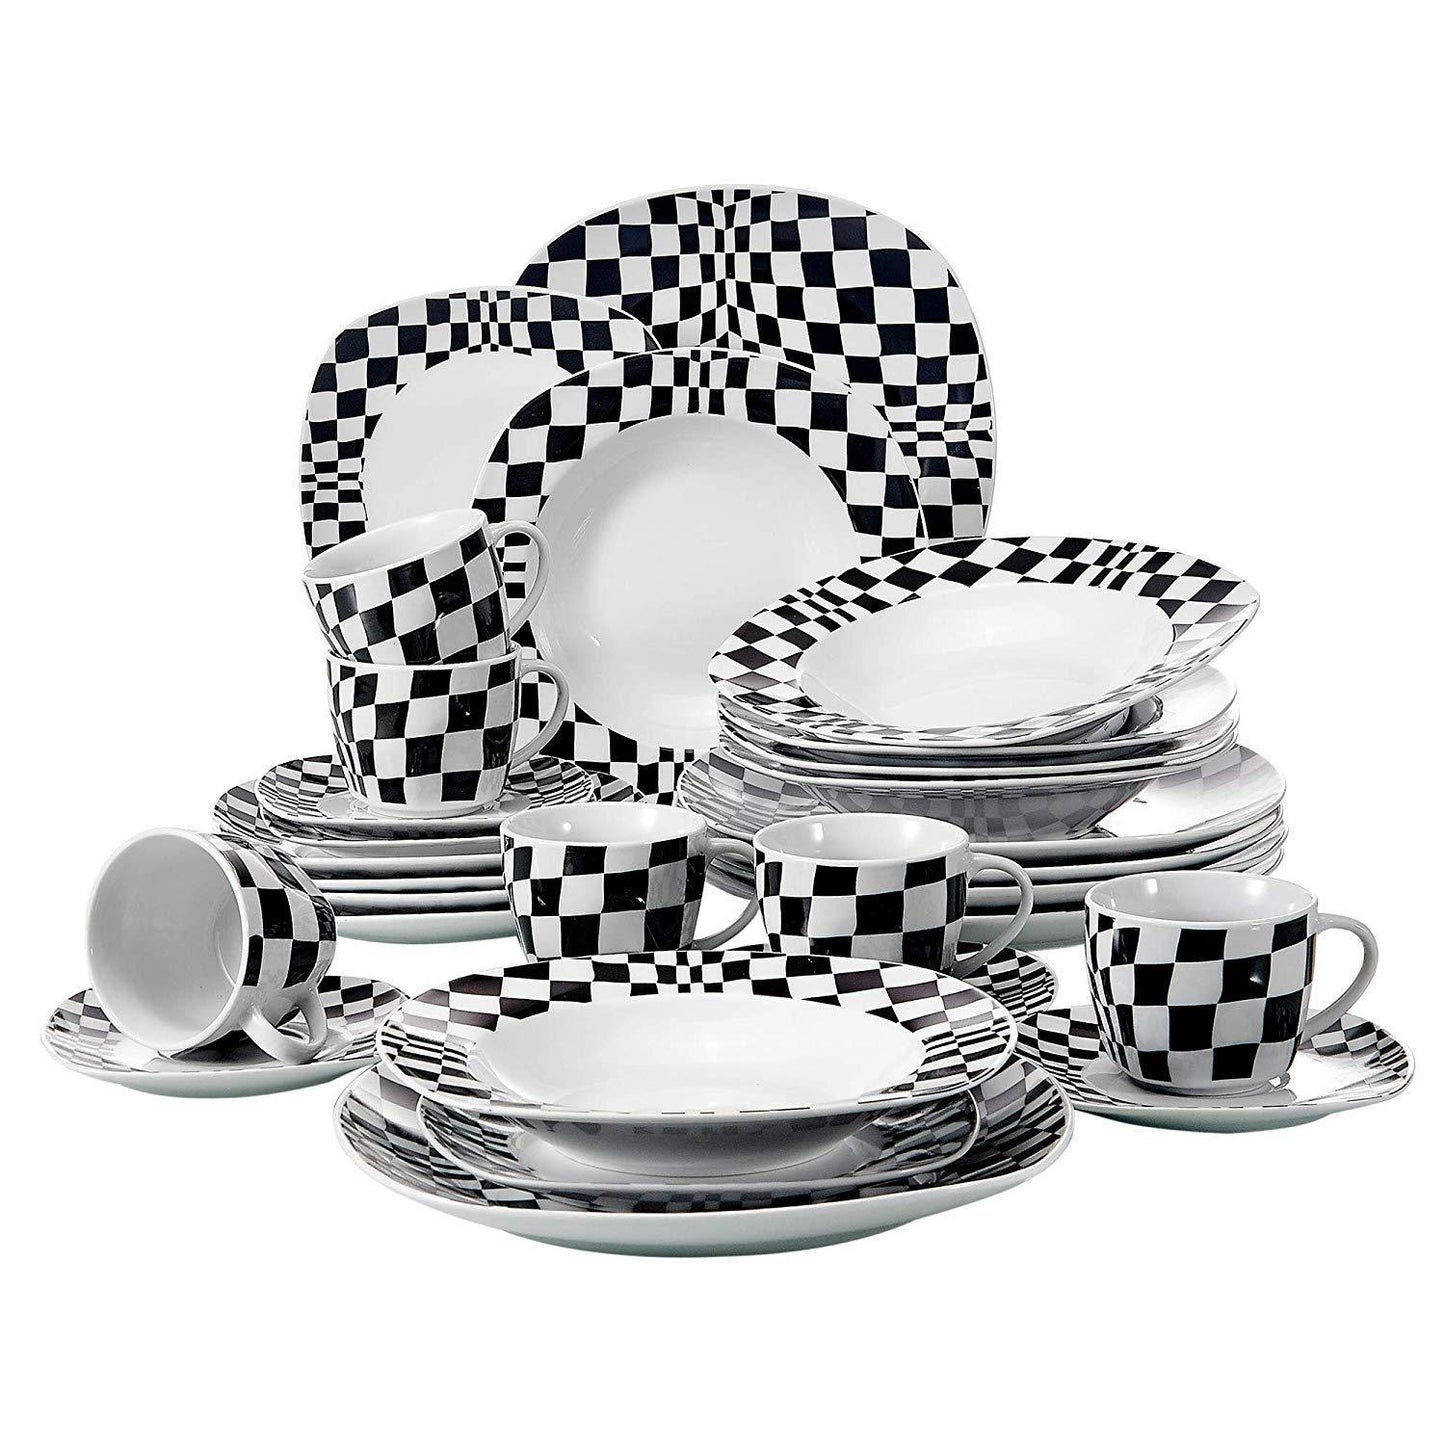 LOUISE 30-Piece Porcelain Ceramic Mosaic Dinnerware Tableware Set with 6*Dessert Plate,Soup Plate,Dinner Plate,Cup&Saucer - Nordic Side - 30, Ceramic, Dessert, Dinnerware, LOUISE, Mosaic, Pie